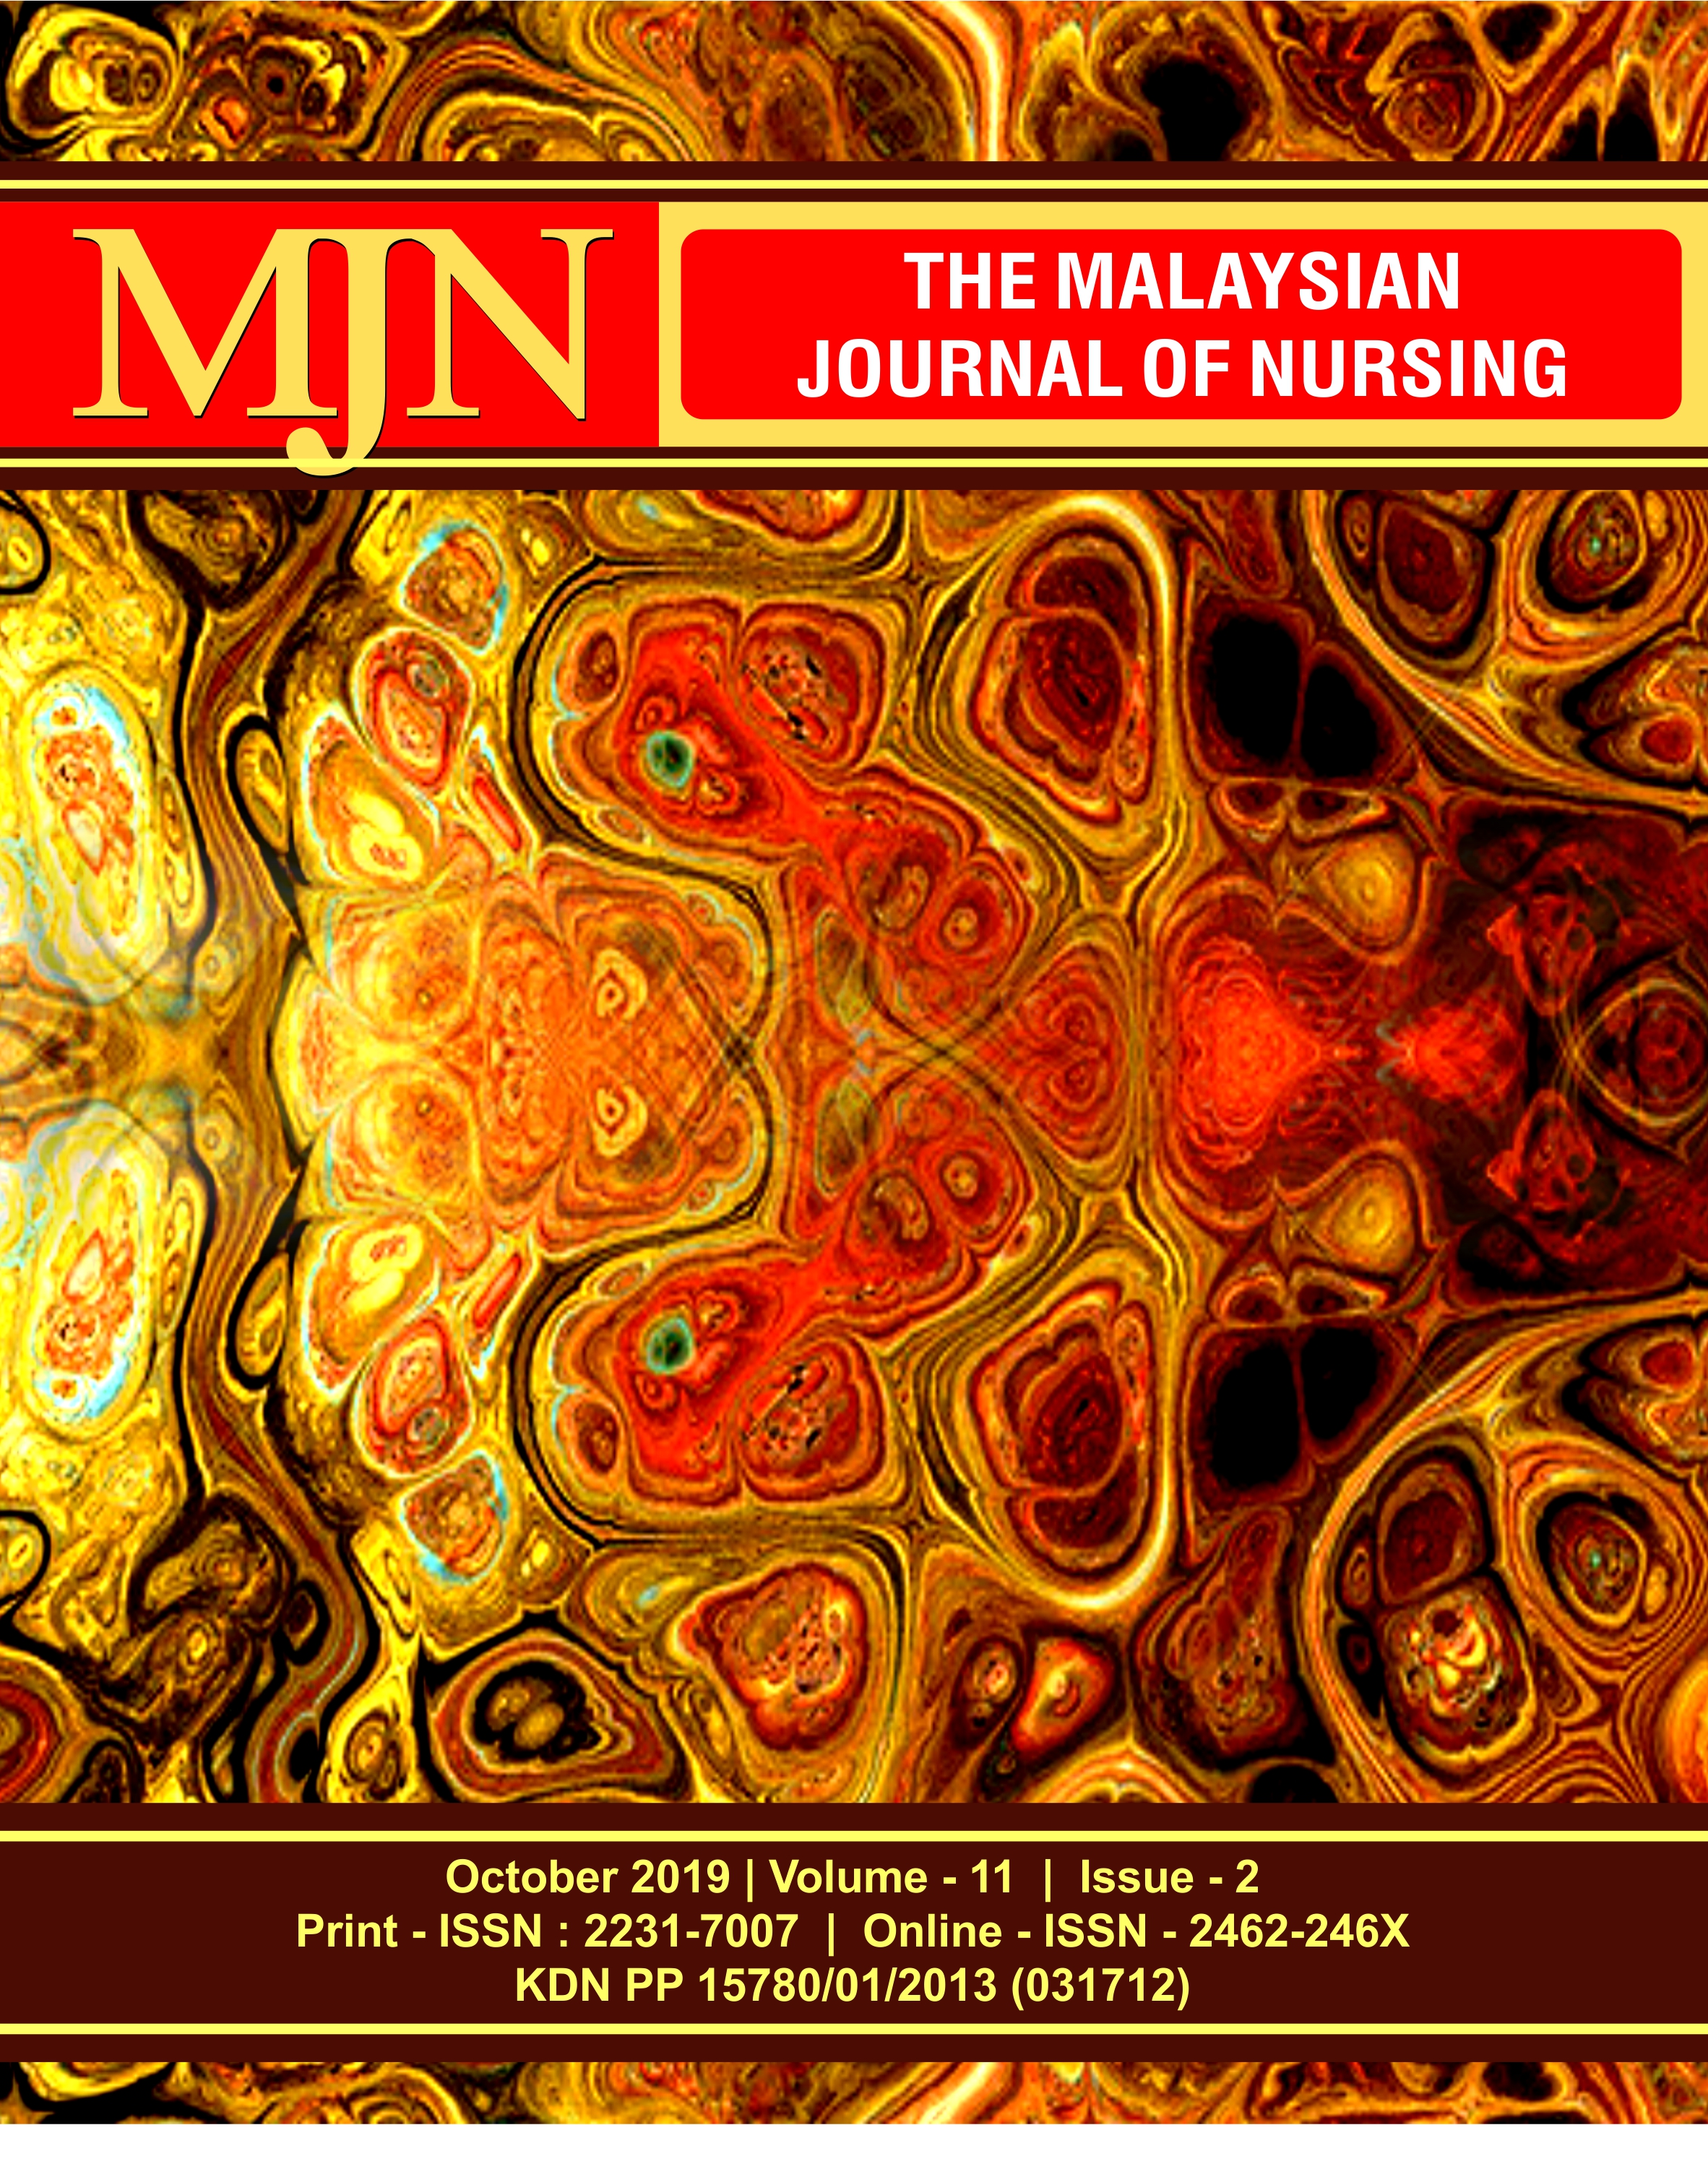 Vol. 11 No. 2 (2019): The Malaysian Journal of Nursing | The Malaysian Journal of Nursing (MJN)